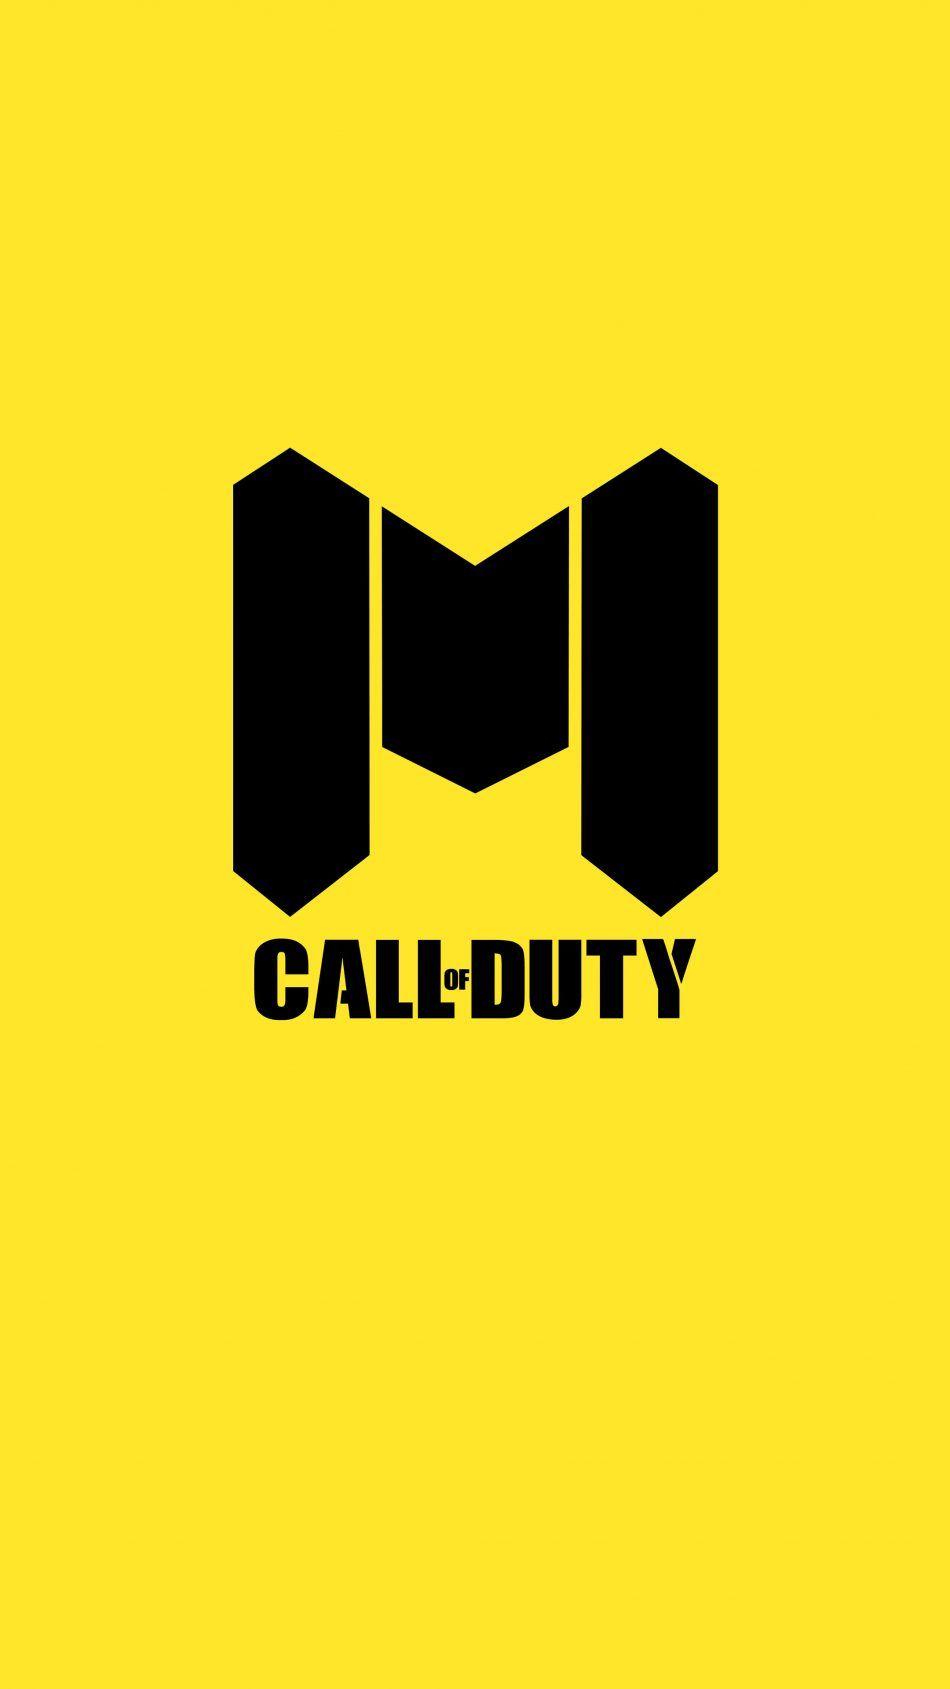 Call of Duty Minimalist Wallpapers - Top Free Call of Duty Minimalist